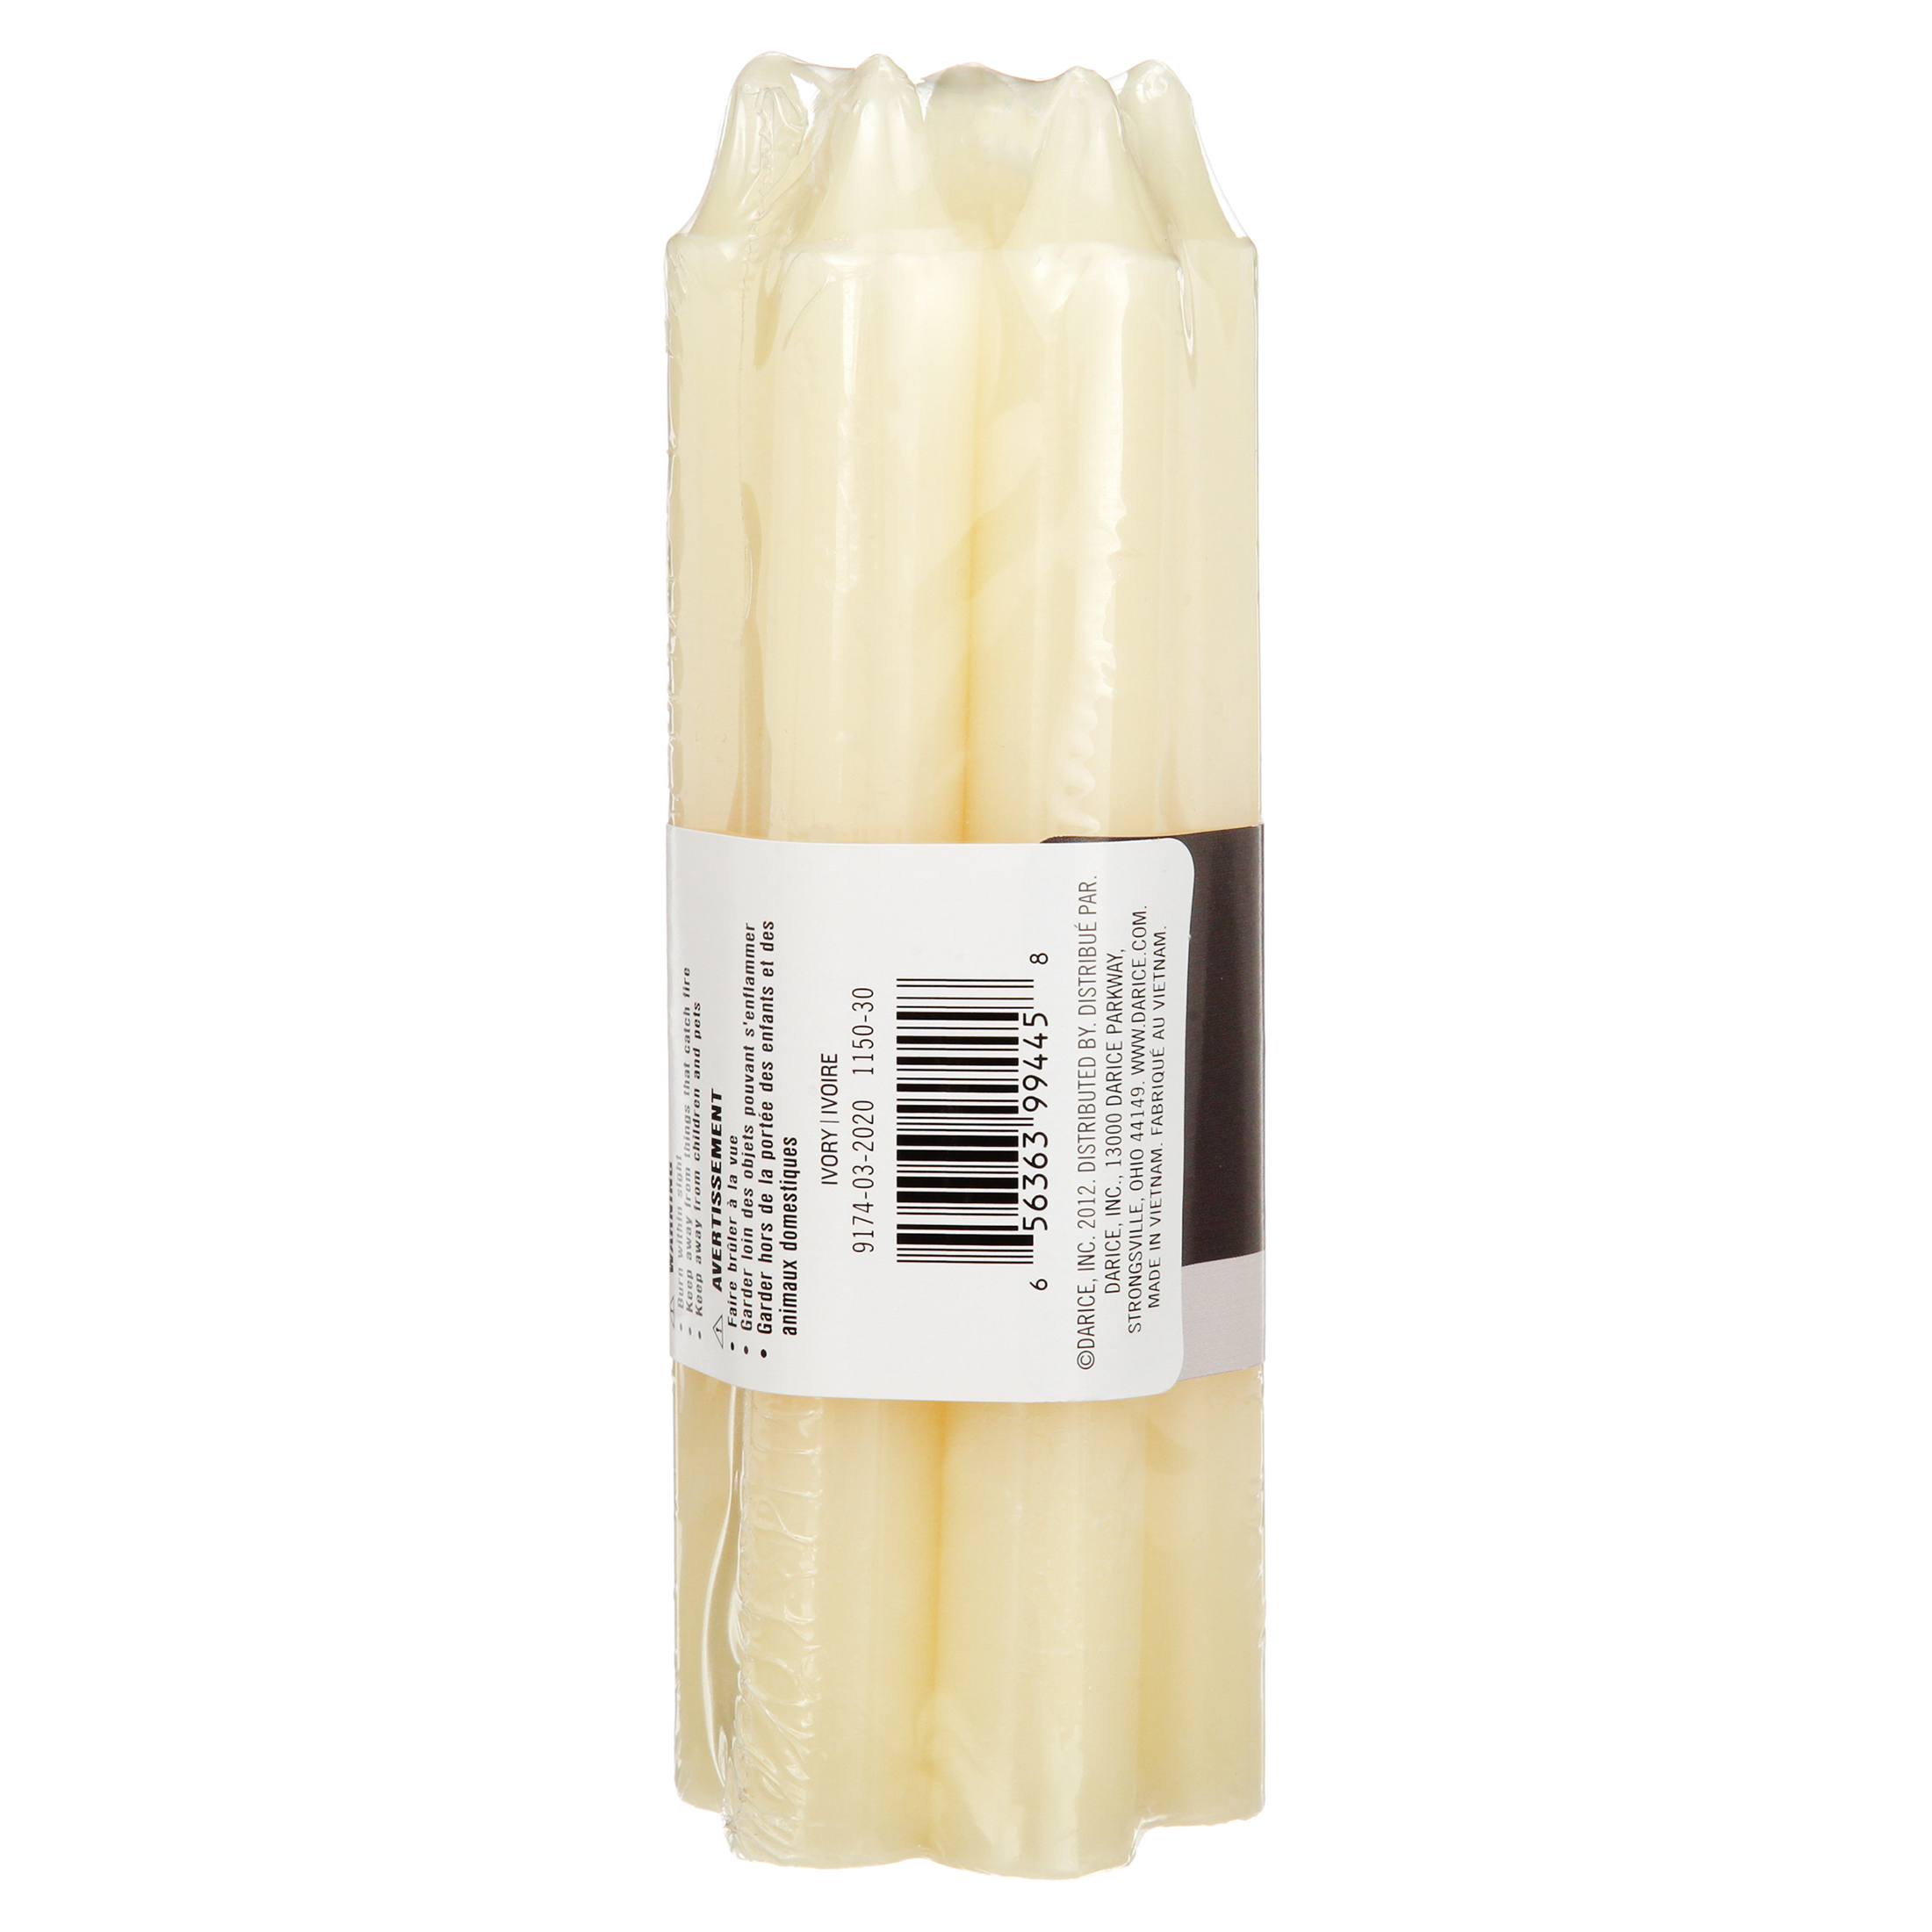 Taper Candles: 7 Inches Ivory Taper Candles, 7 Pack - image 7 of 7